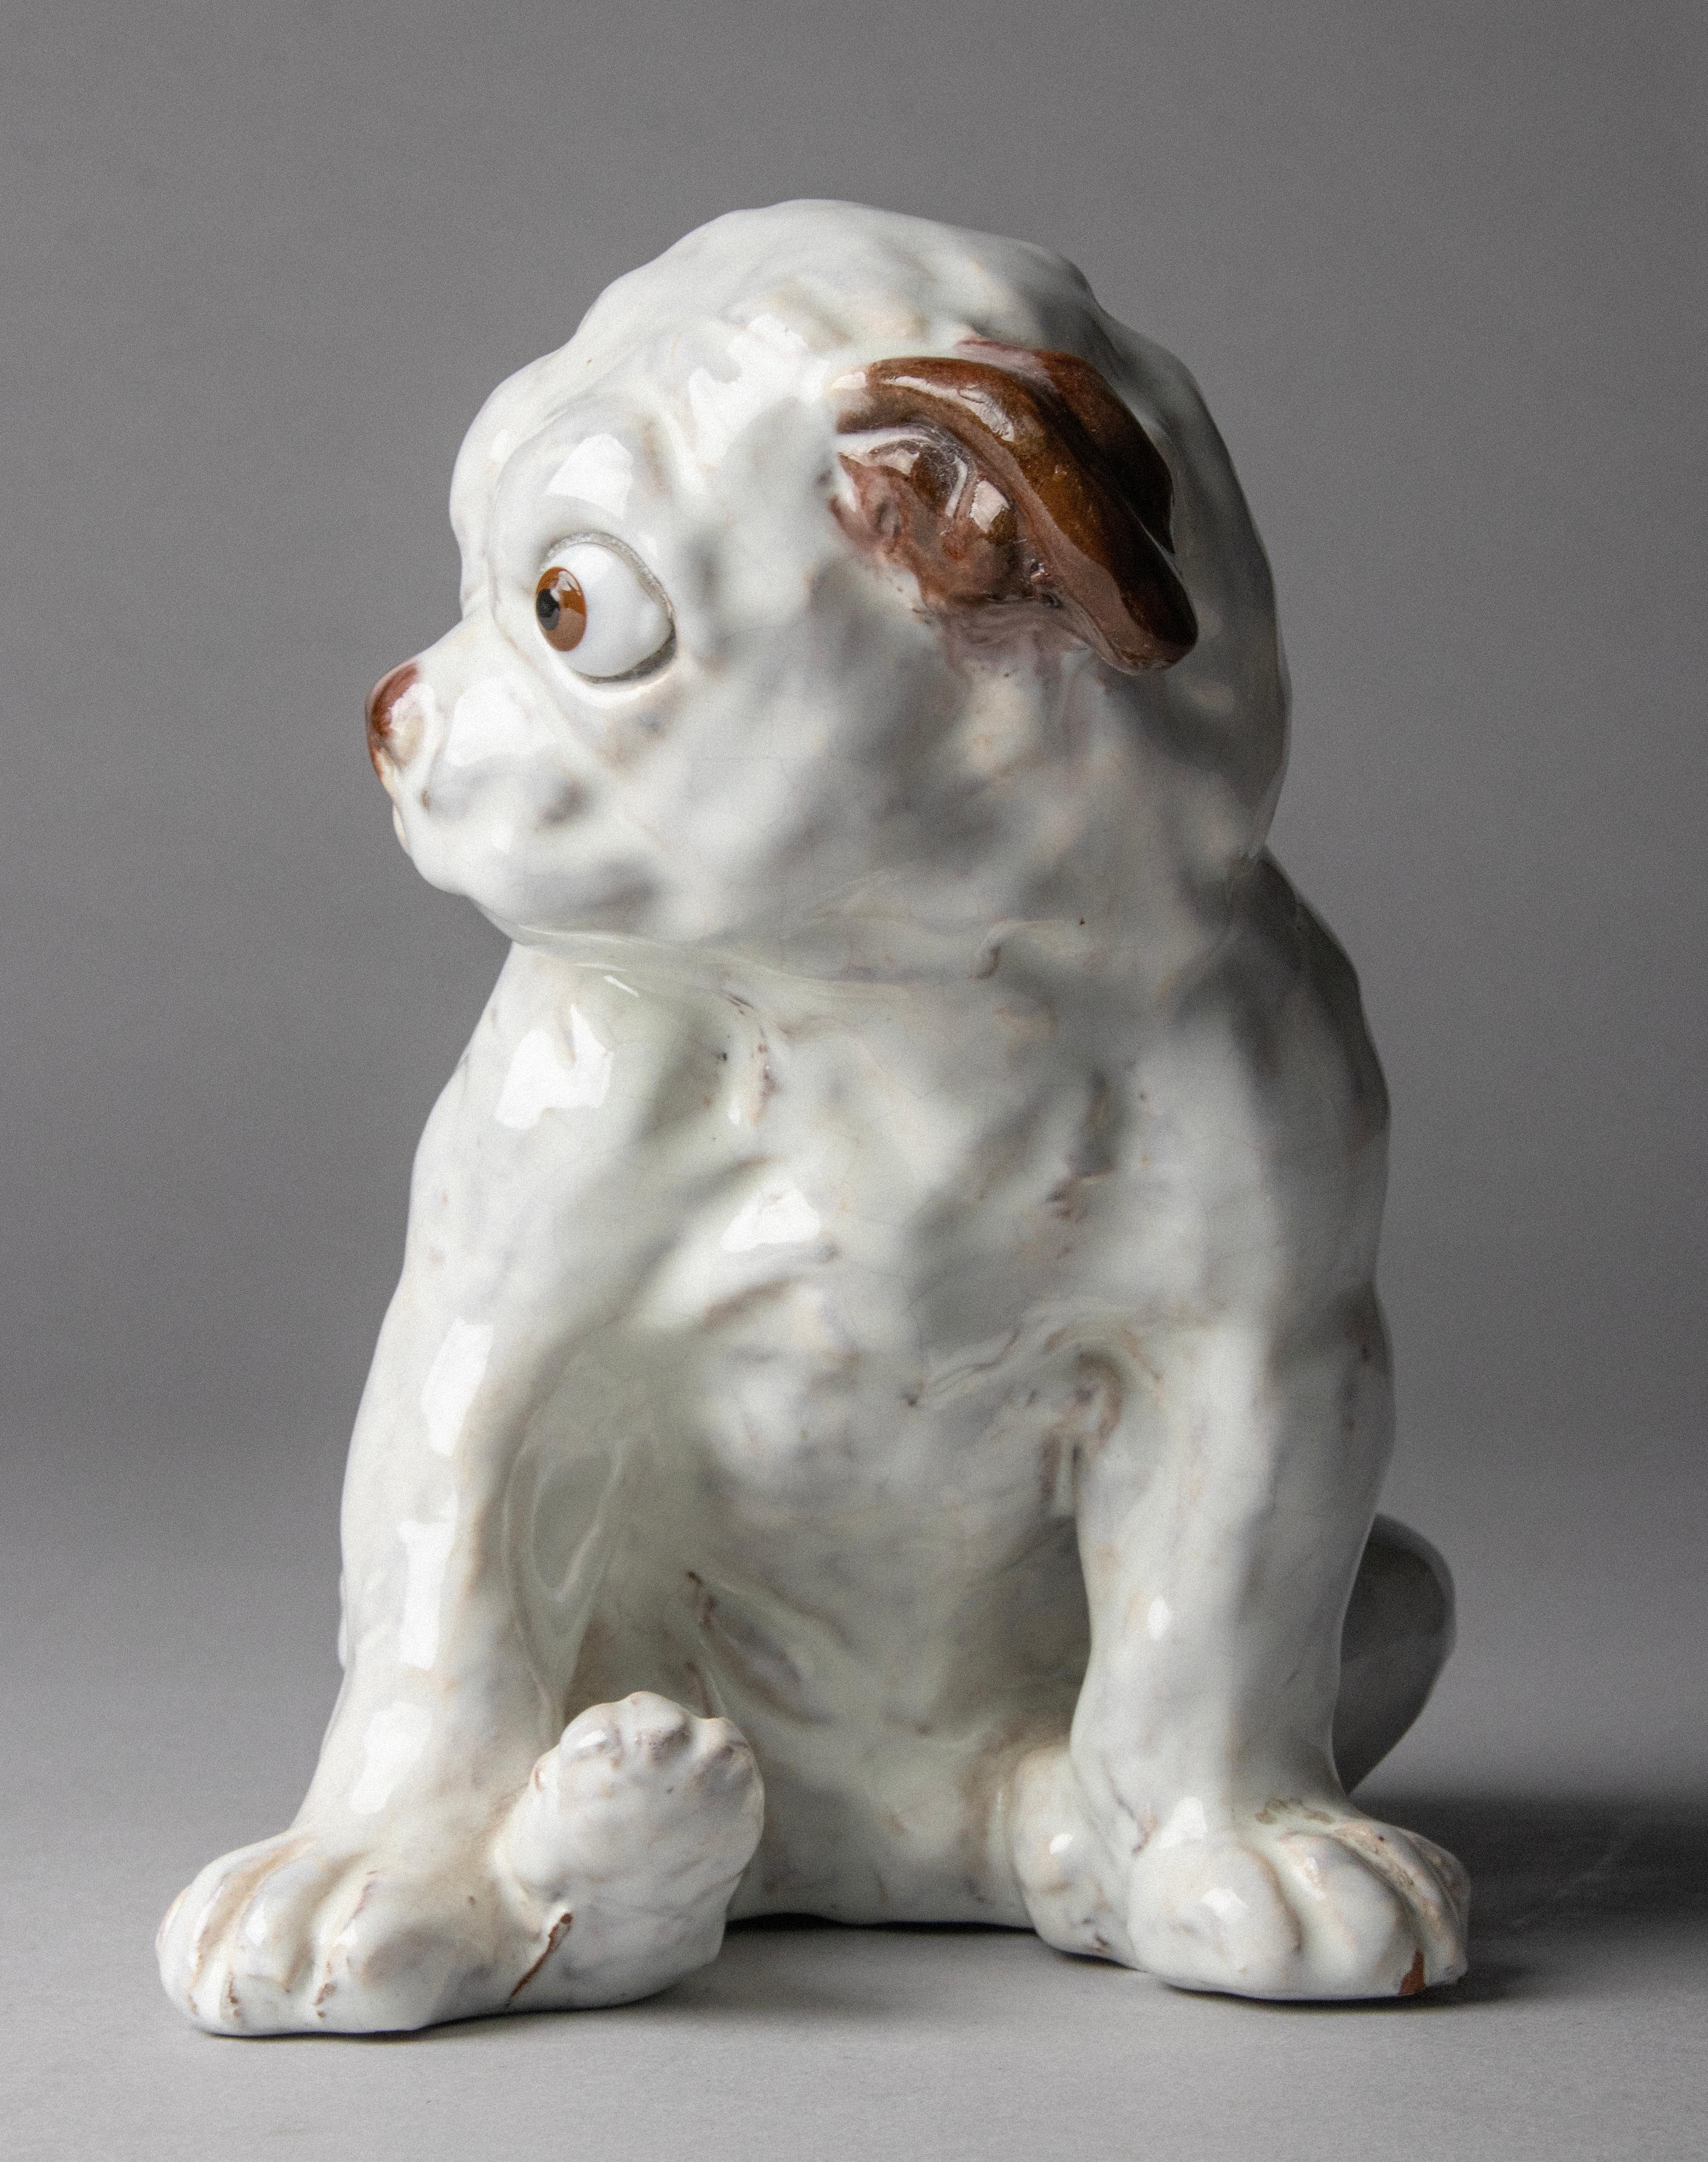 Early 20th Century 19th Century Ceramic Sculpture of a Pug Dog by J. Filmont Caen, France